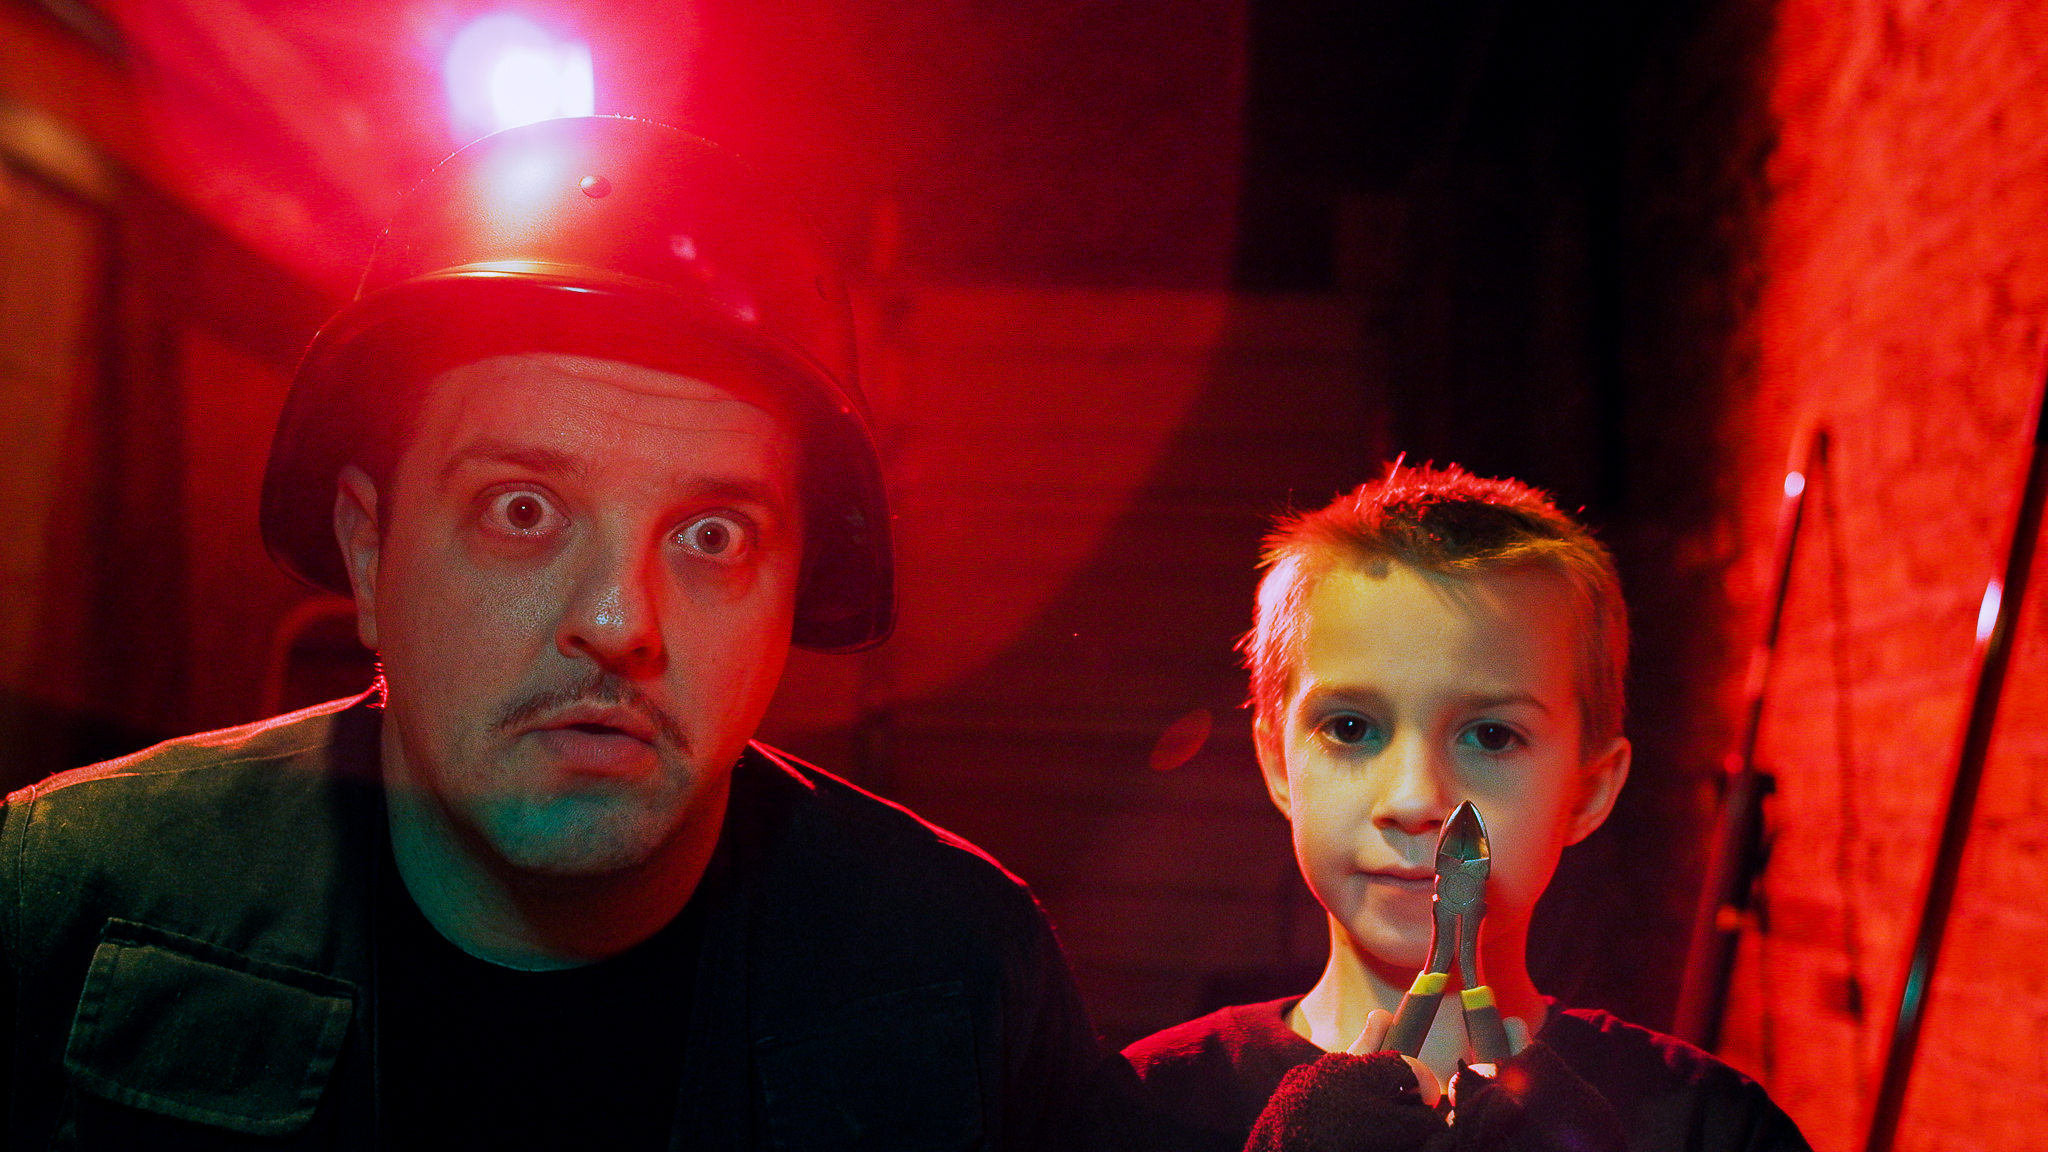 Father and son talking in a red lit room with bomb squad outfit.